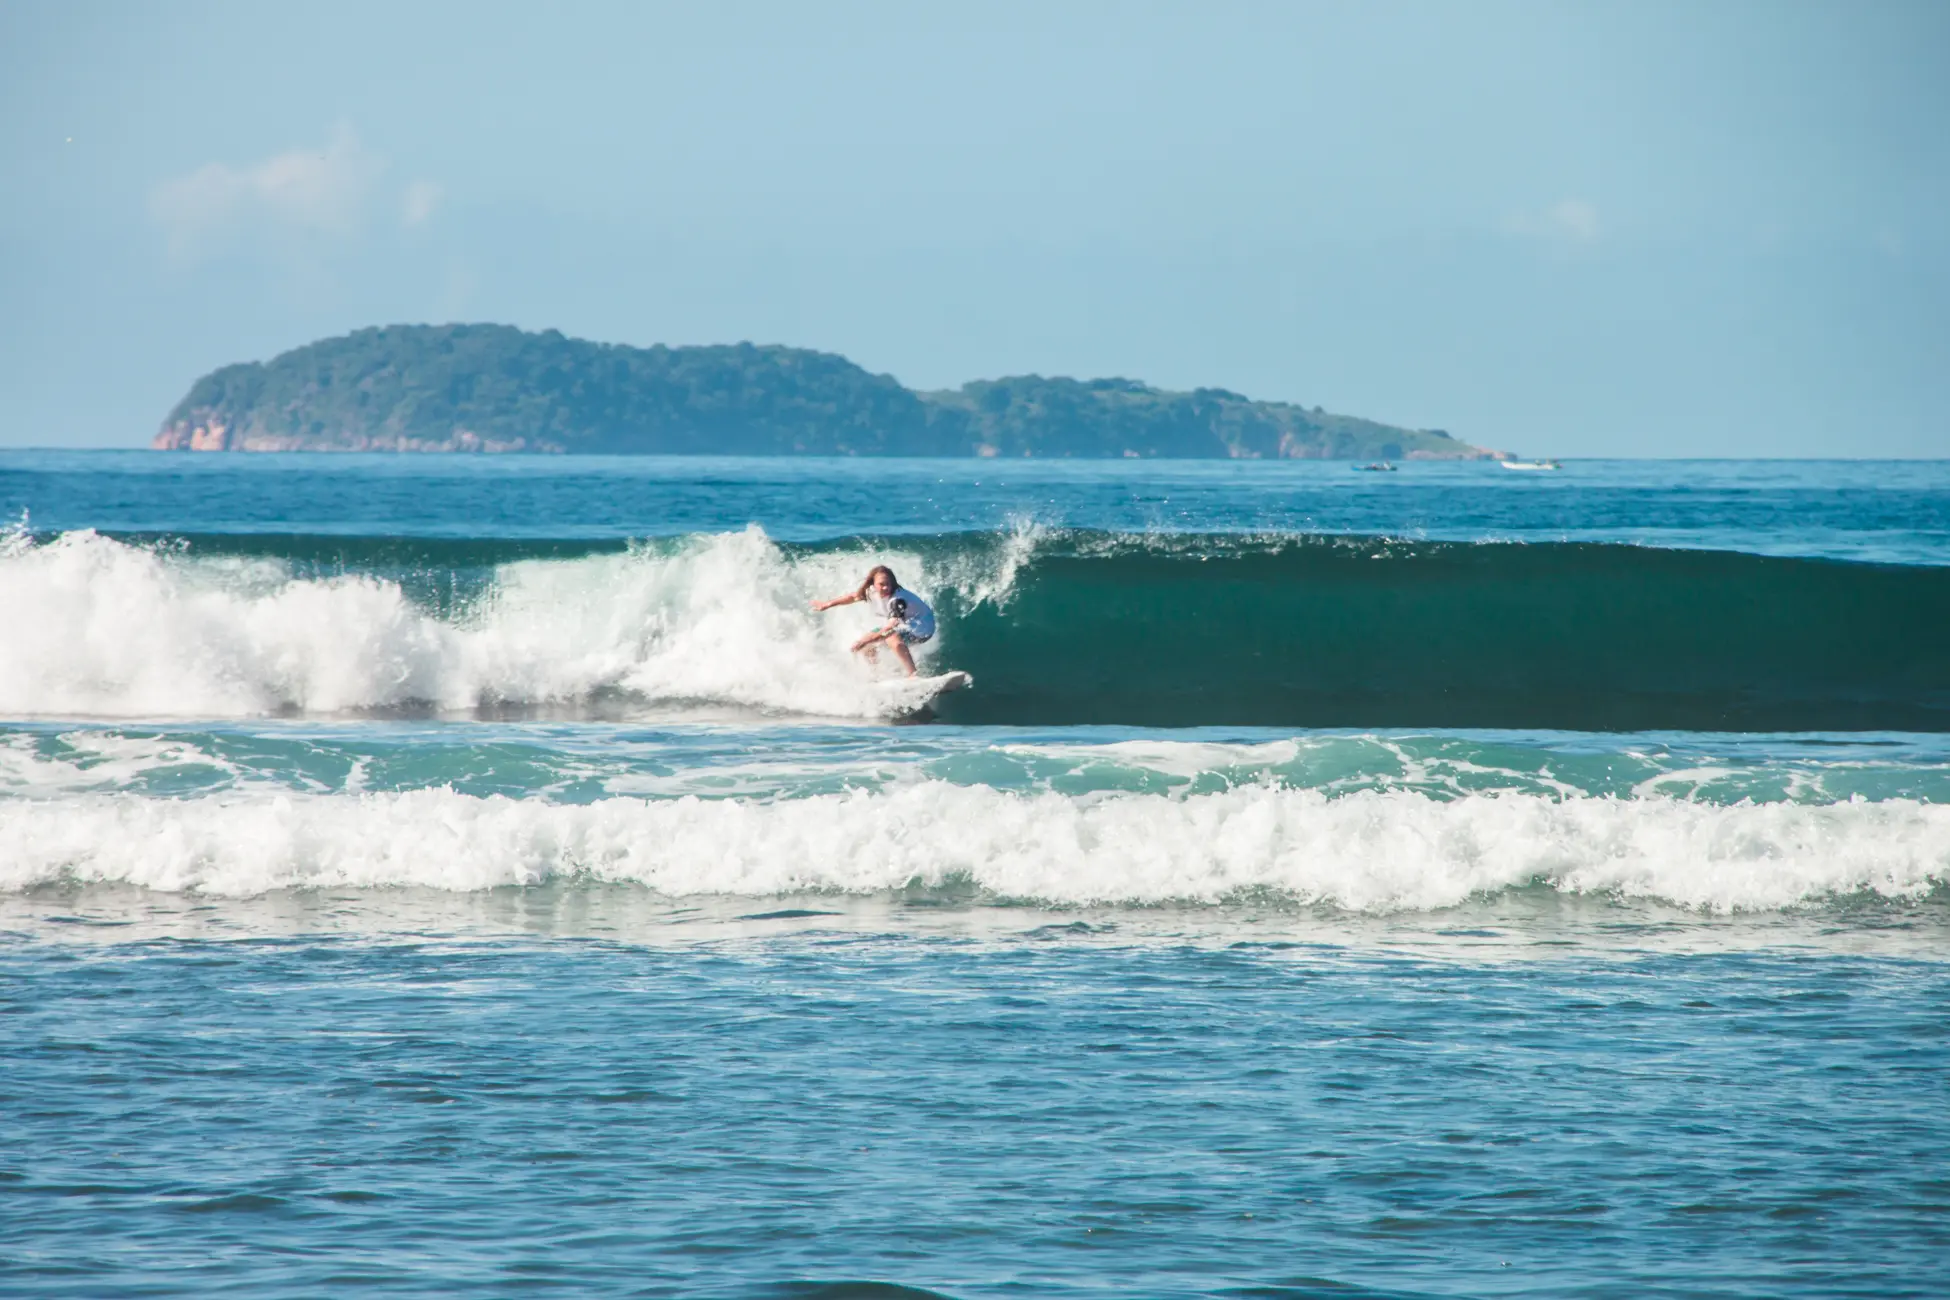 Lone surfer on a wave early in the morning in Kertasari, Sumbawa - Indonesia vs. Thailand